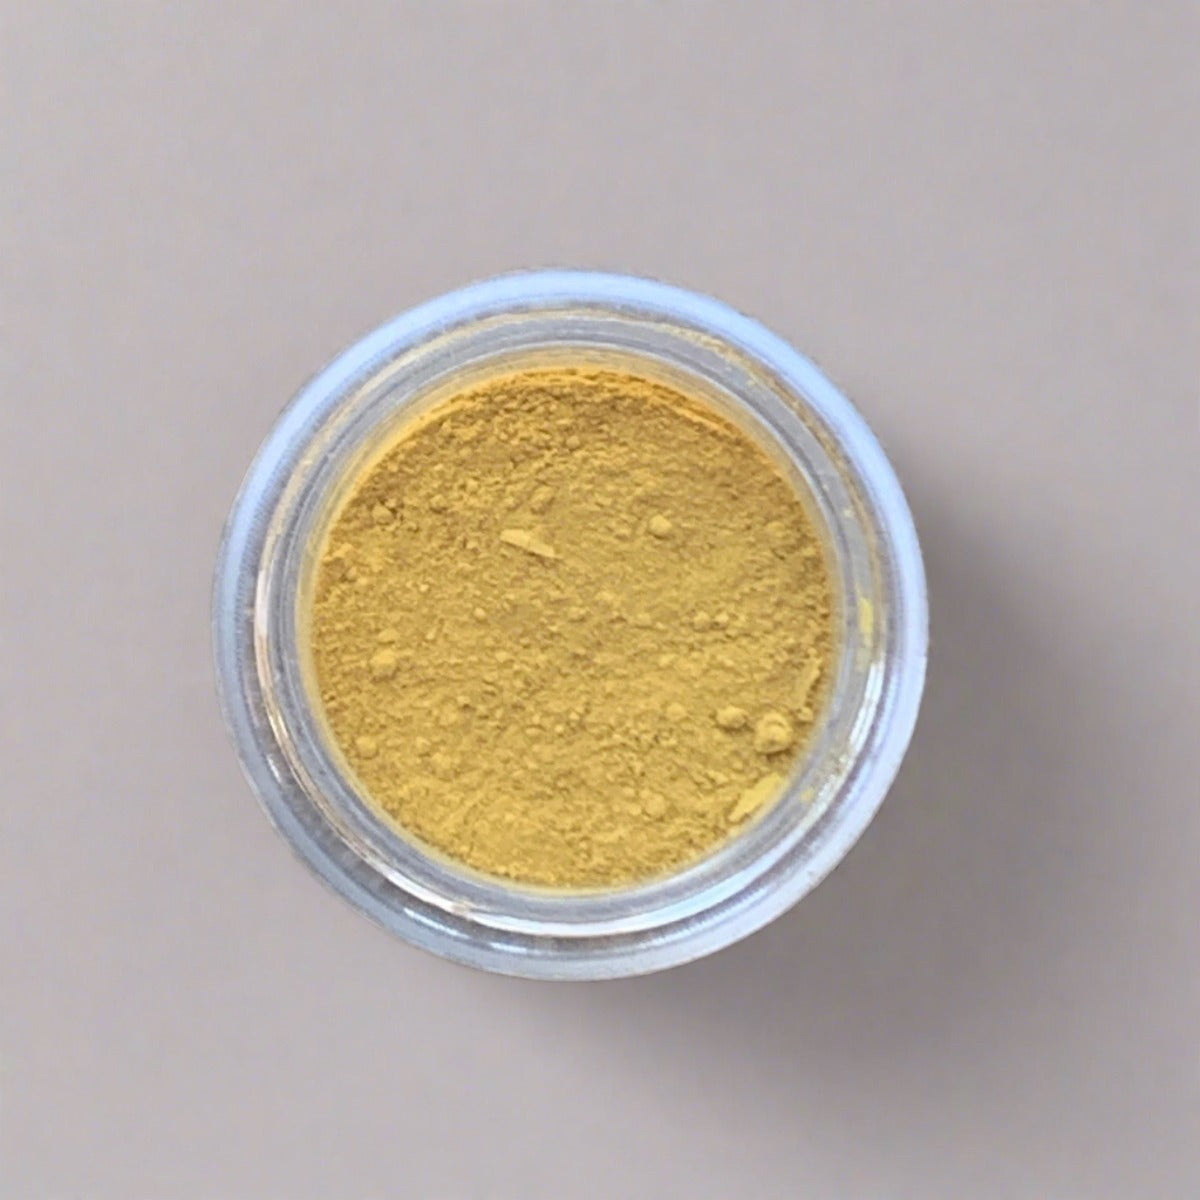 A jar of Beacon Eye Shadow: A delightful light yellow shade designed to effortlessly enhance and illuminate any eye makeup look